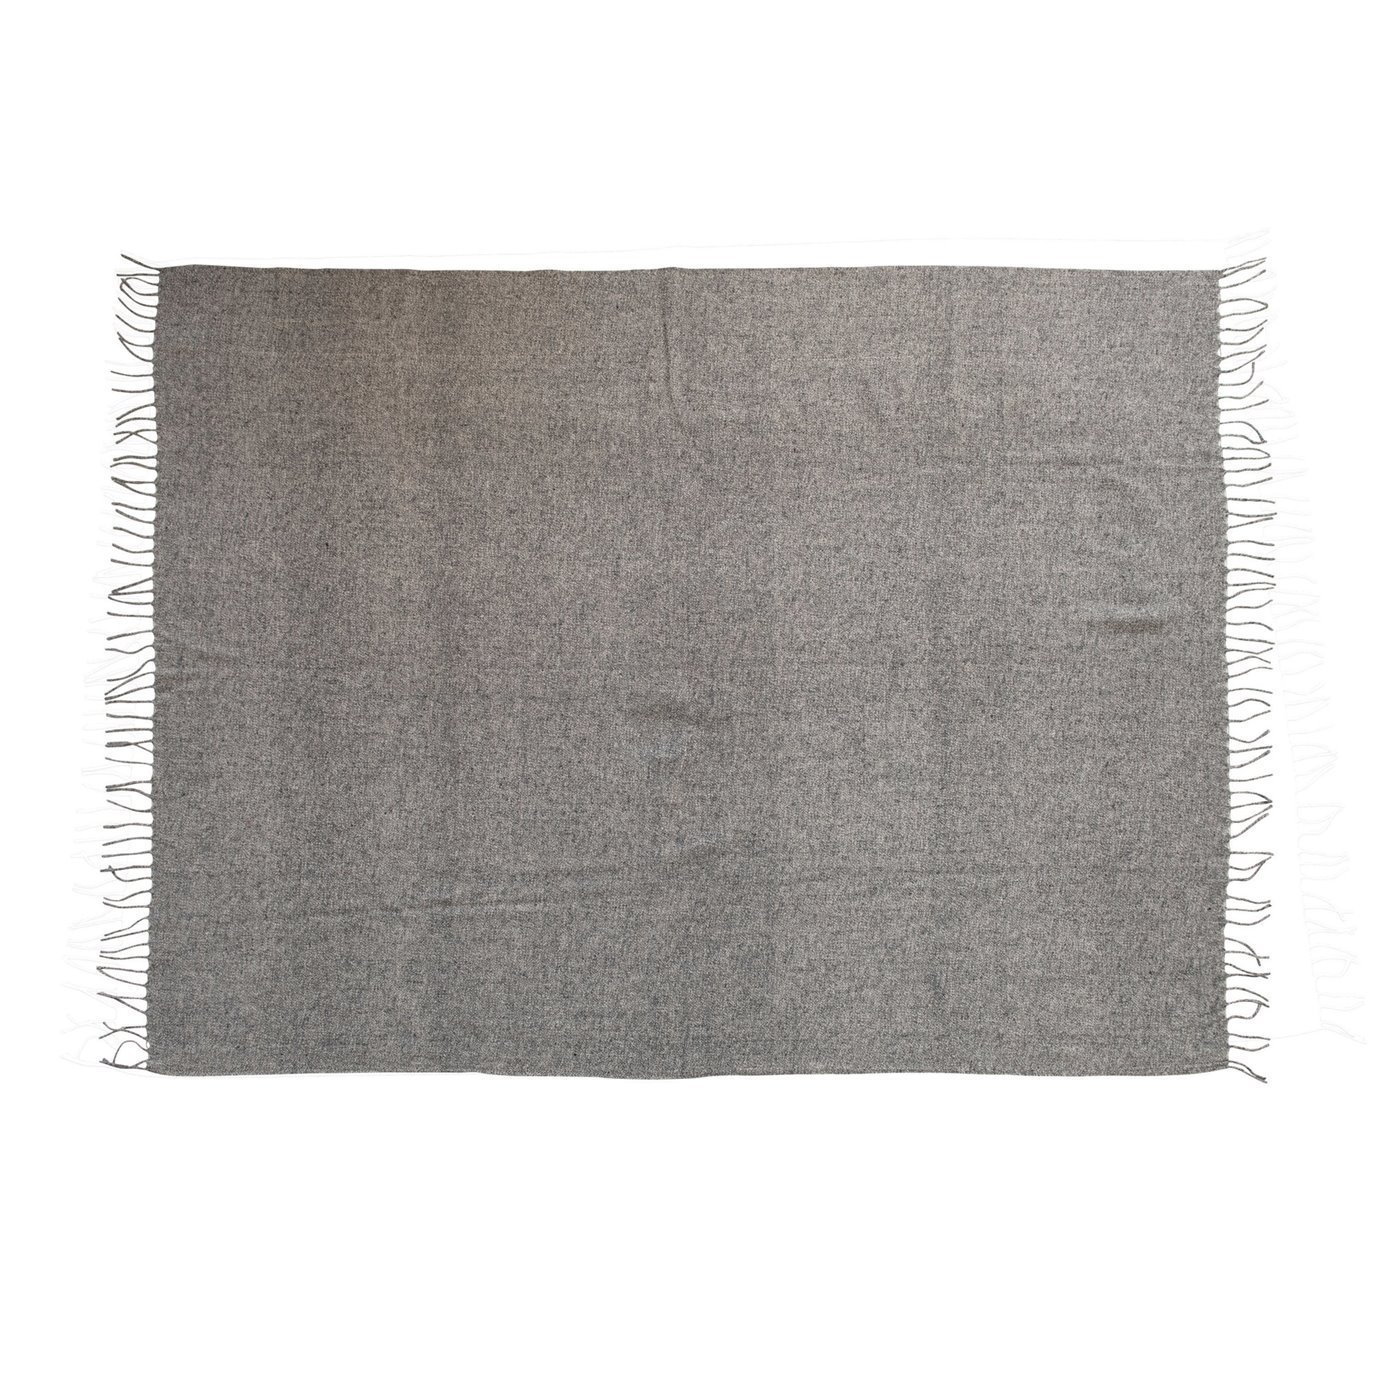 Wool Blend Throw with Fringe, Grey